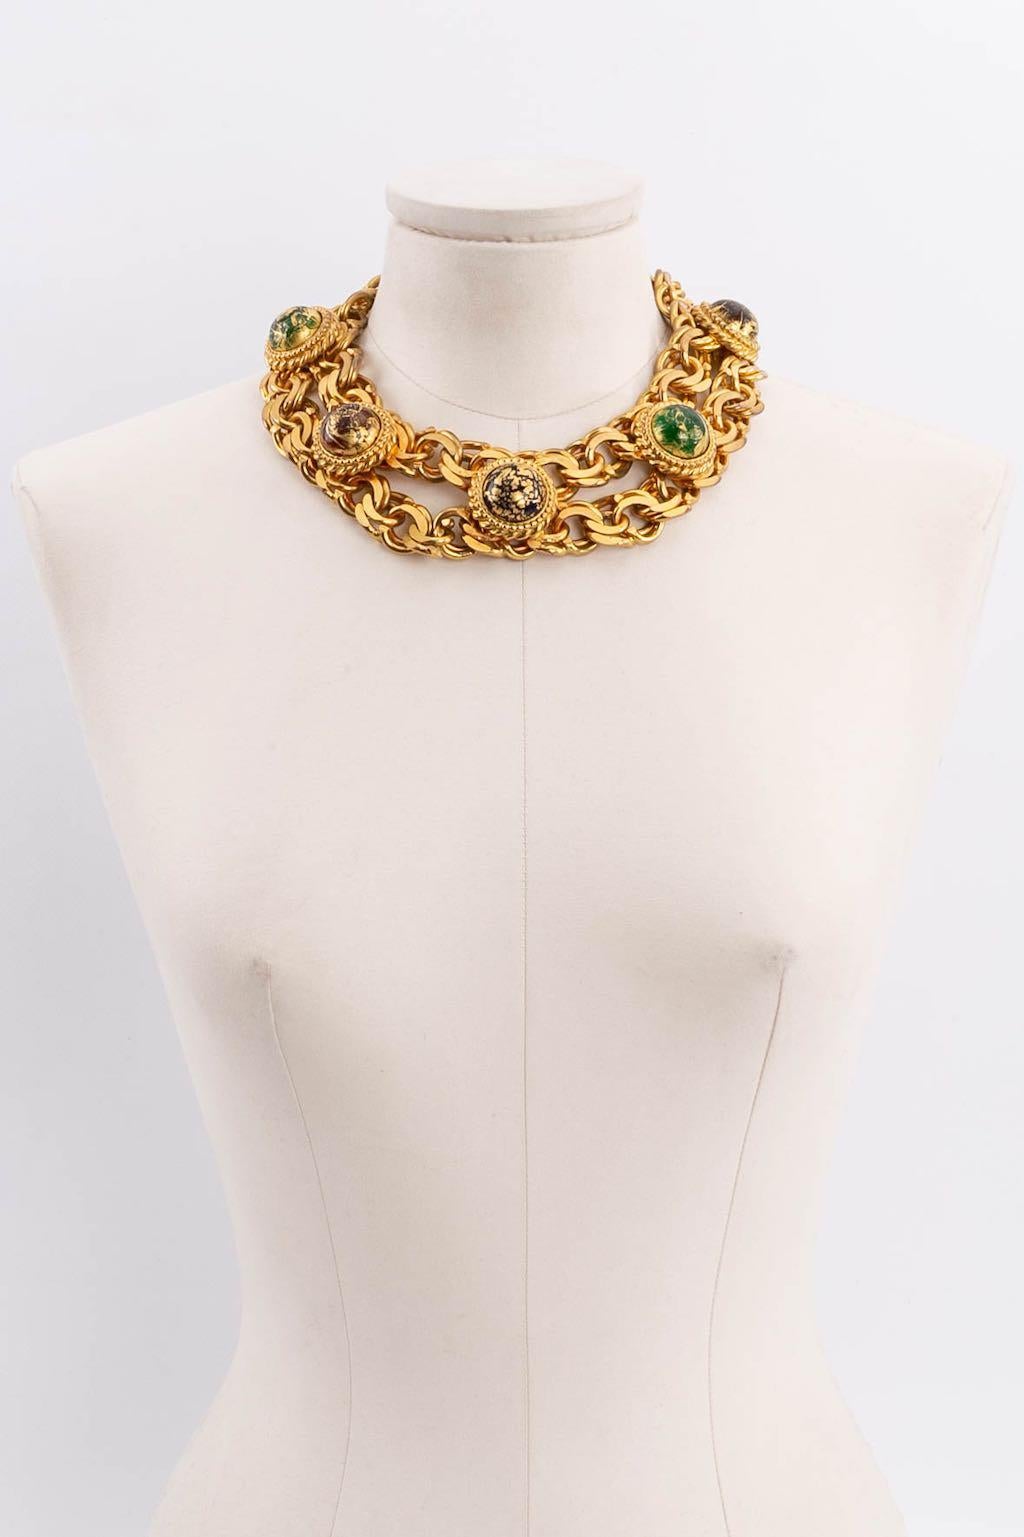 Isabel Canovas -Double chain short necklace in gold metal decorated with glass paste cabochons.

Additional information: 
Dimensions: Length: 40 cm - Width: 4 cm
Condition: Very good condition
Seller Ref number: BC110